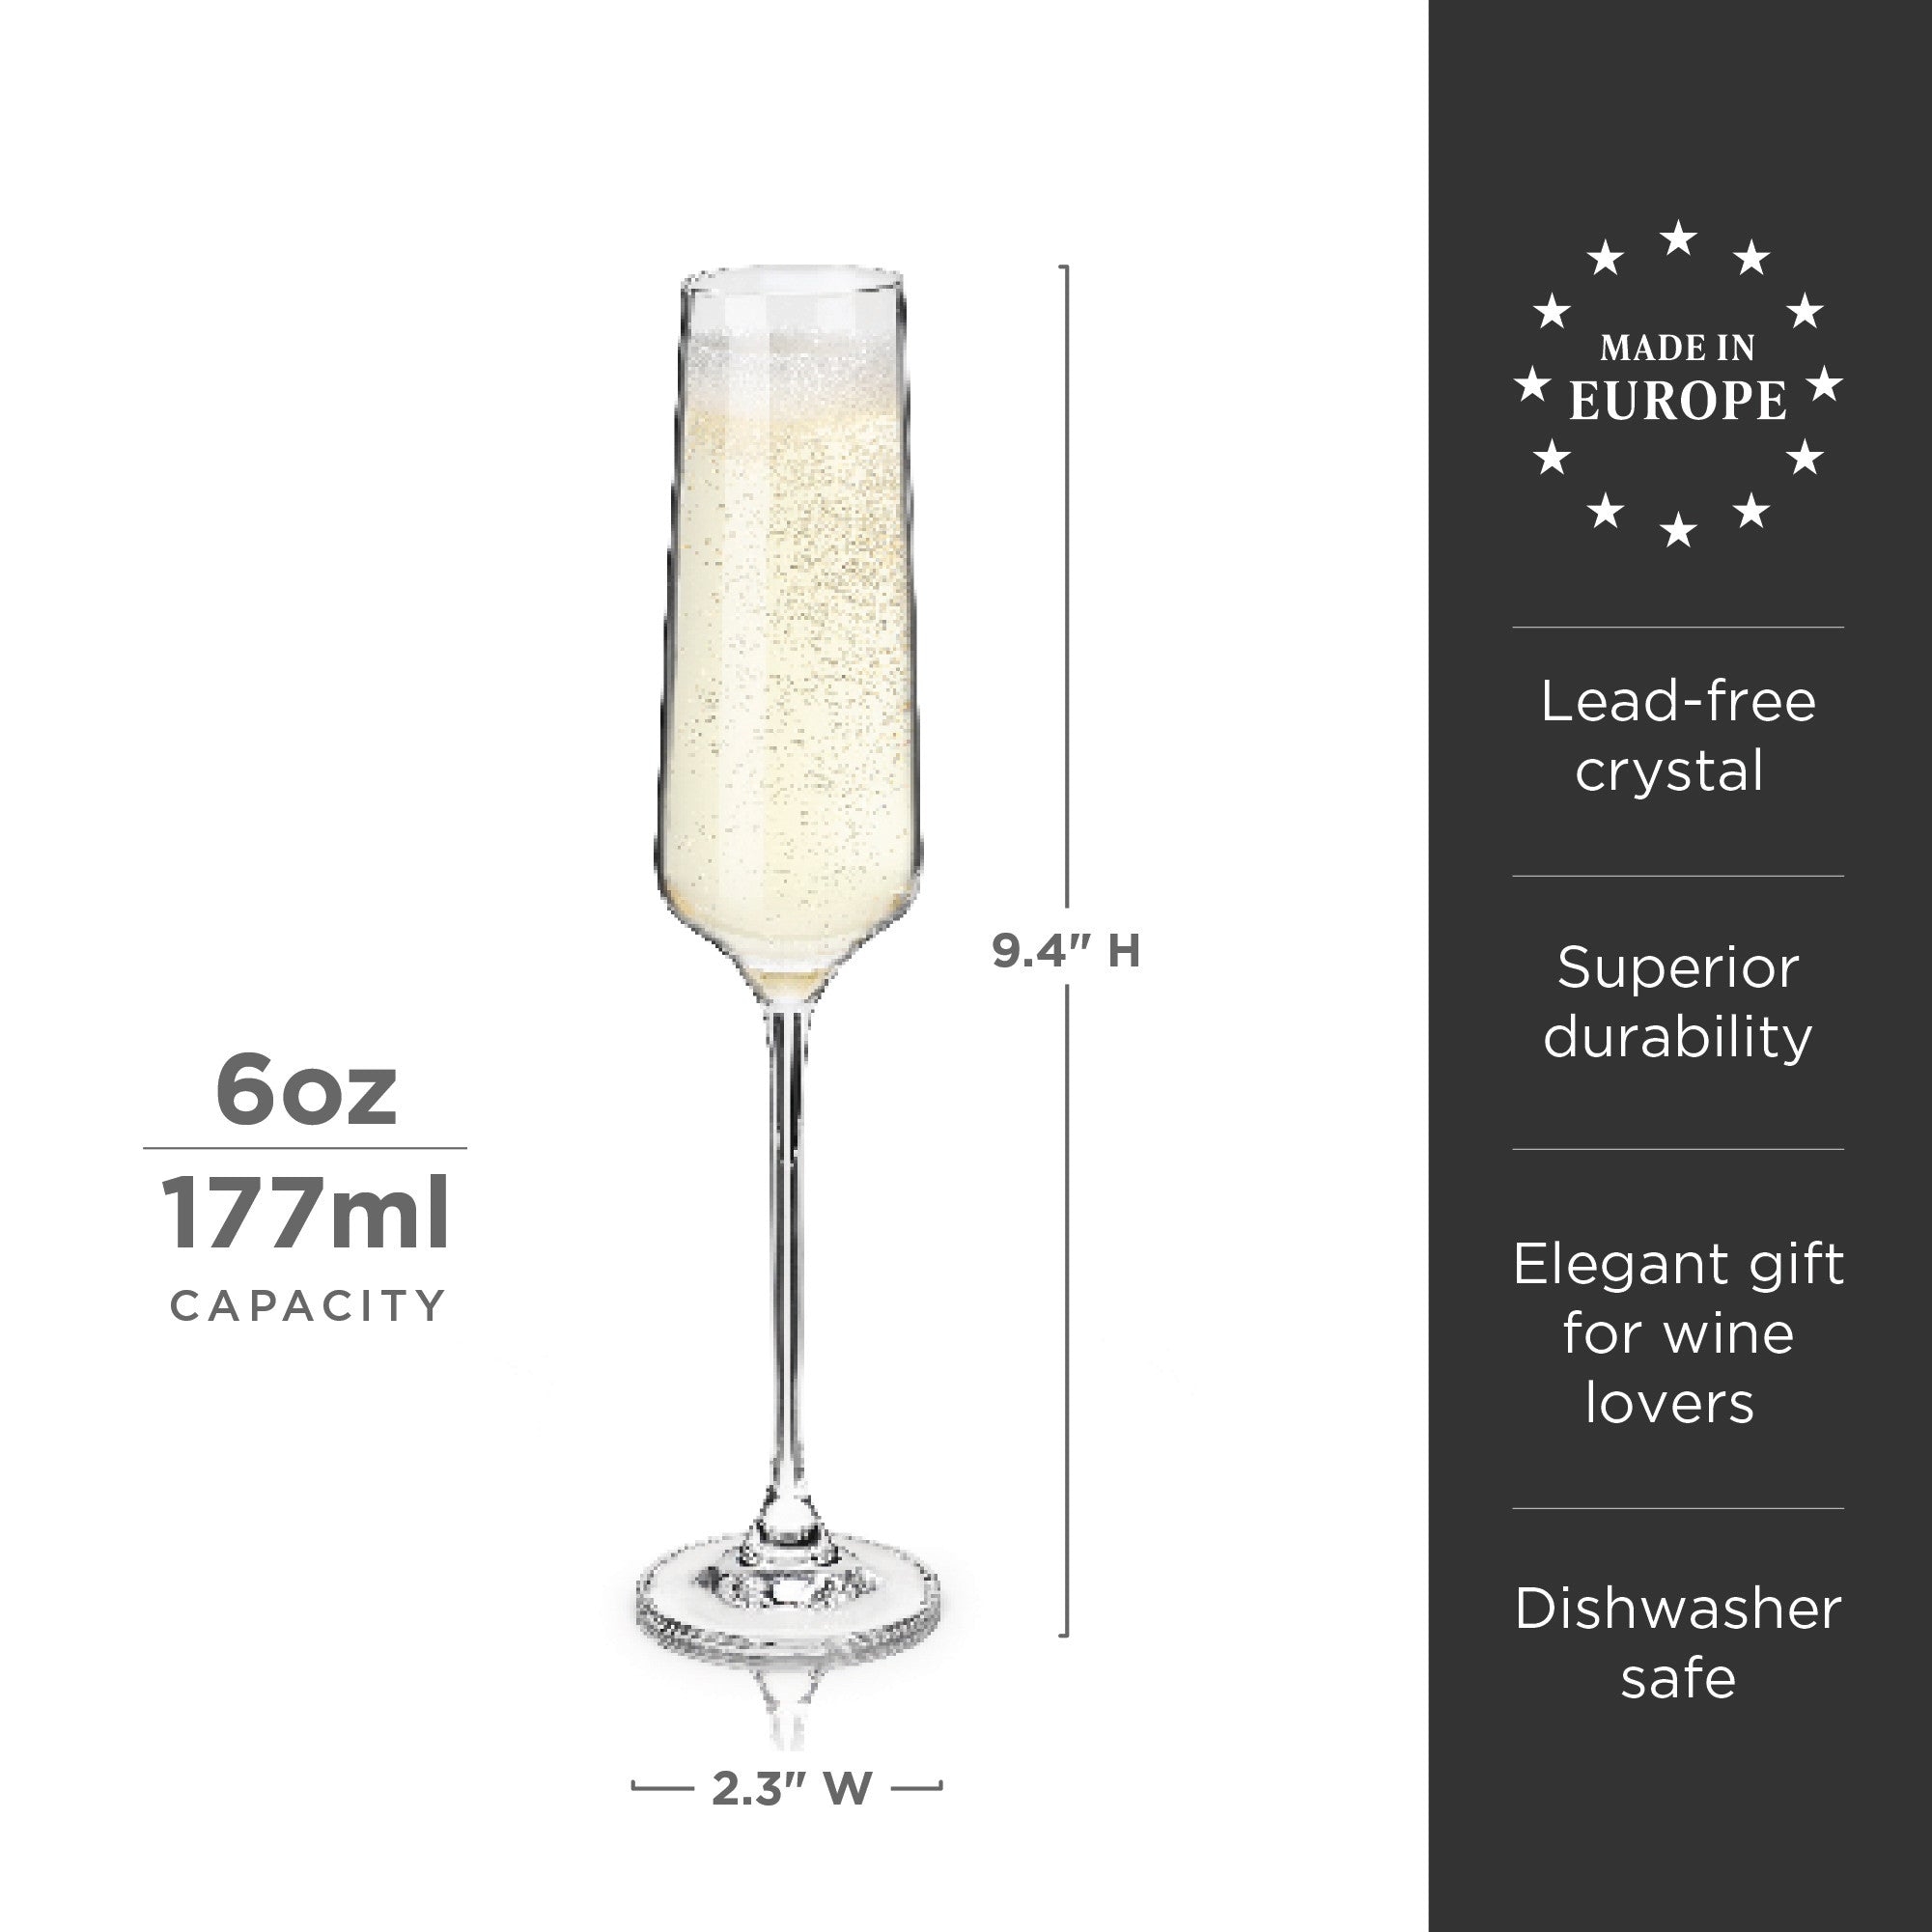 Viski Reserve Inez Crystal Champagne Flutes - European Crafted Champagne  Glasses Set of 4 - 6oz Stemmed Sparkling Wine Glasses for Wedding or  Anniversary and Special Occasions Gift Ideas